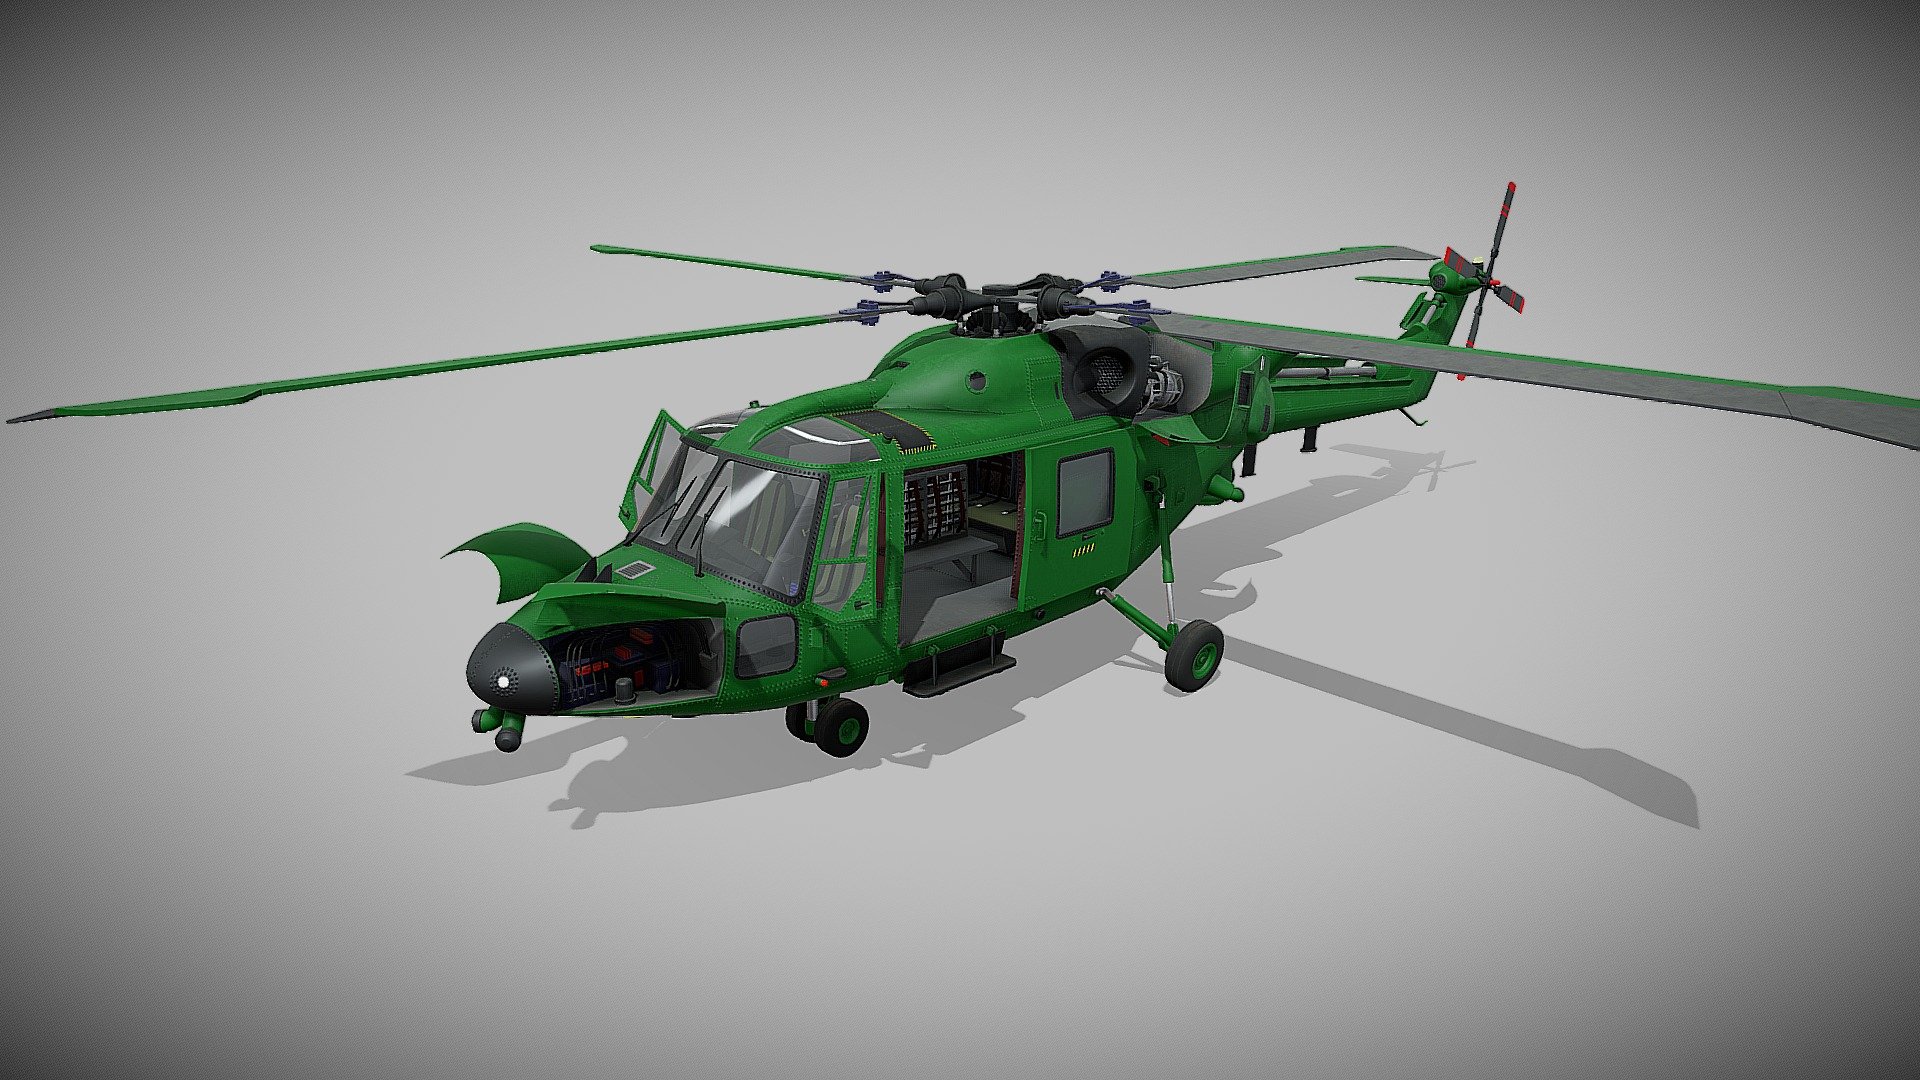 The Westland Lynx is a British multi-purpose twin-engined military helicopter.
Game ready model, model scale Unity engine. Separetes parts : doors, hoods, rotors. There is an additional Blender file (version 2.79 / 2.93) 3d model